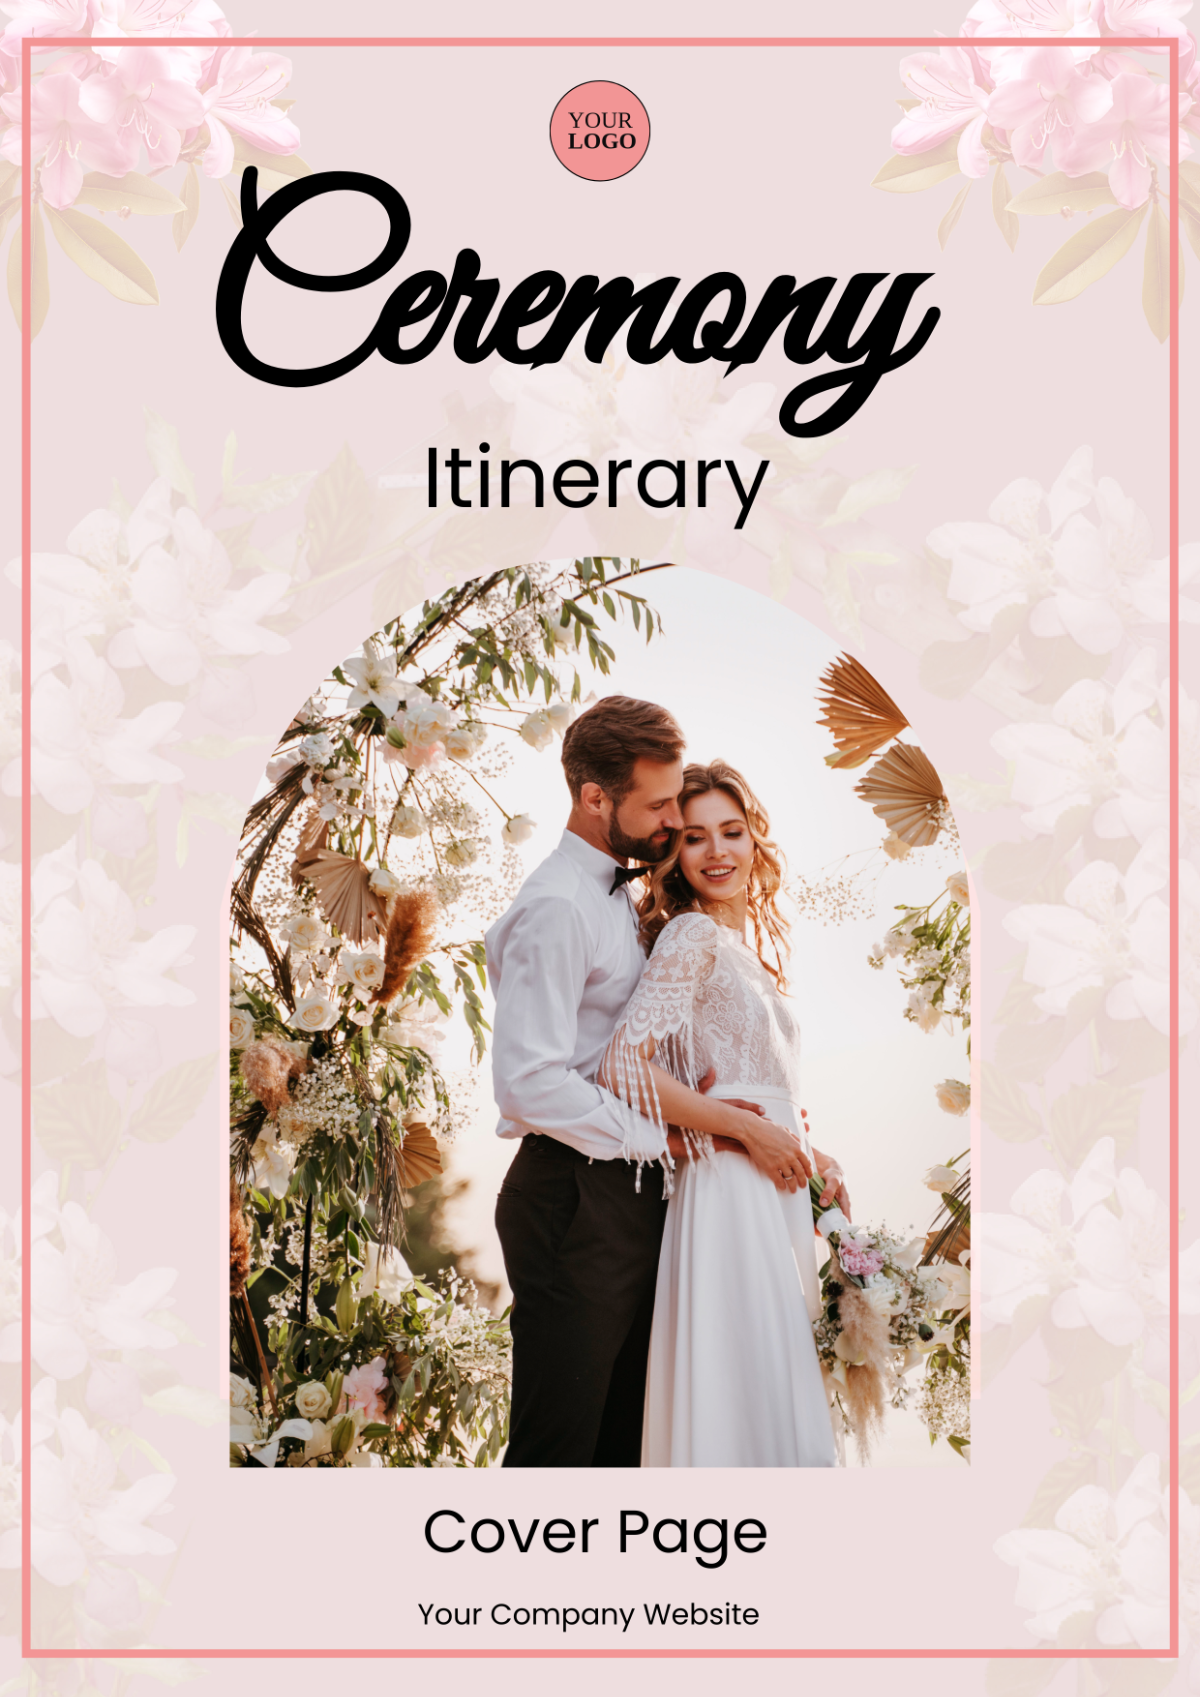 Free Ceremony Itinerary Cover Page Template